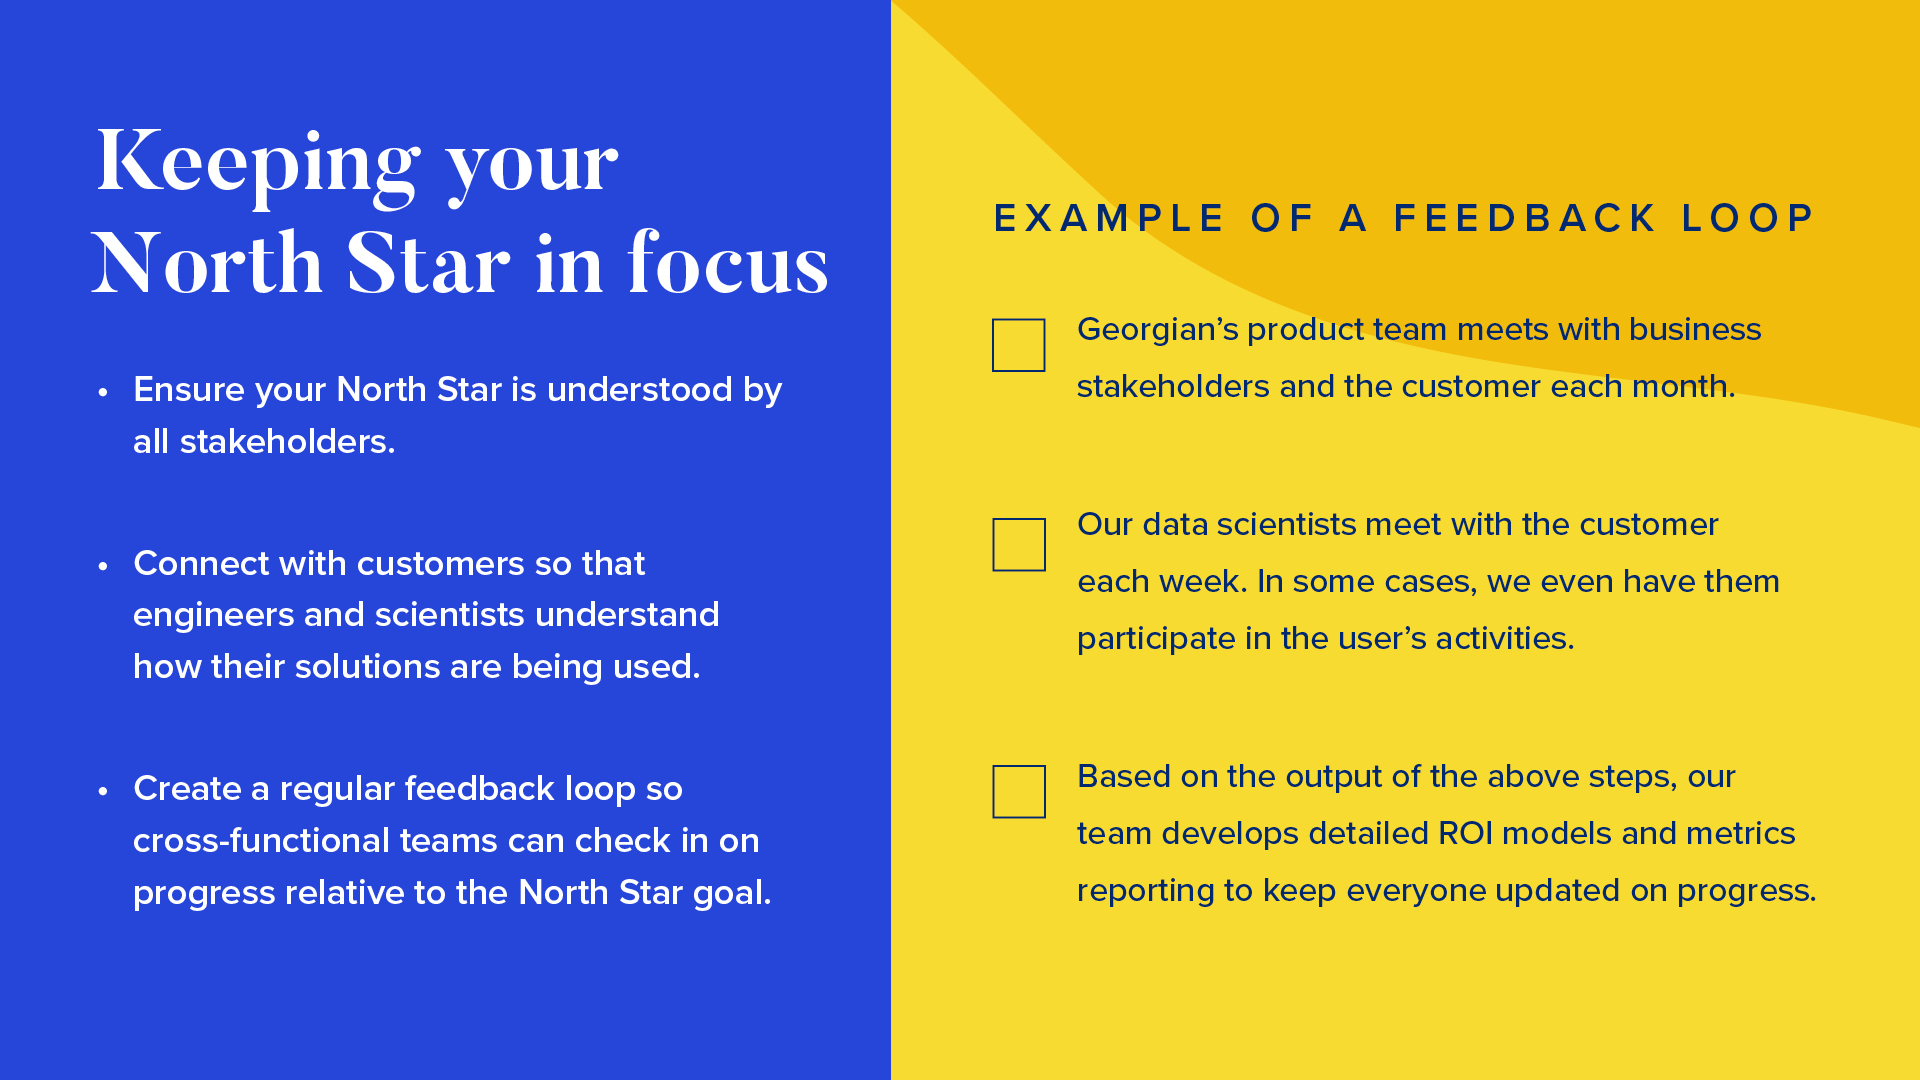 INFOGRAPHIC #2: Keeping your North Star in focus  

Left side: 
Ensure your North Star is understood by all stakeholders.
Connect with customers so that engineers and scientists understand how their solutions are being used.
Create a regular feedback loop so cross-functional teams can check in on progress relative to the North Star goal.

Right side: Example of a feedback loop



Georgian’s product team meets with business stakeholders and the customer each month.
Our data scientists meet with the customer each week. In some cases, we even have them participate in the user’s activities. 
Based on the output of the above steps, our team develops detailed ROI models and metrics reporting to keep everyone updated on progress.
